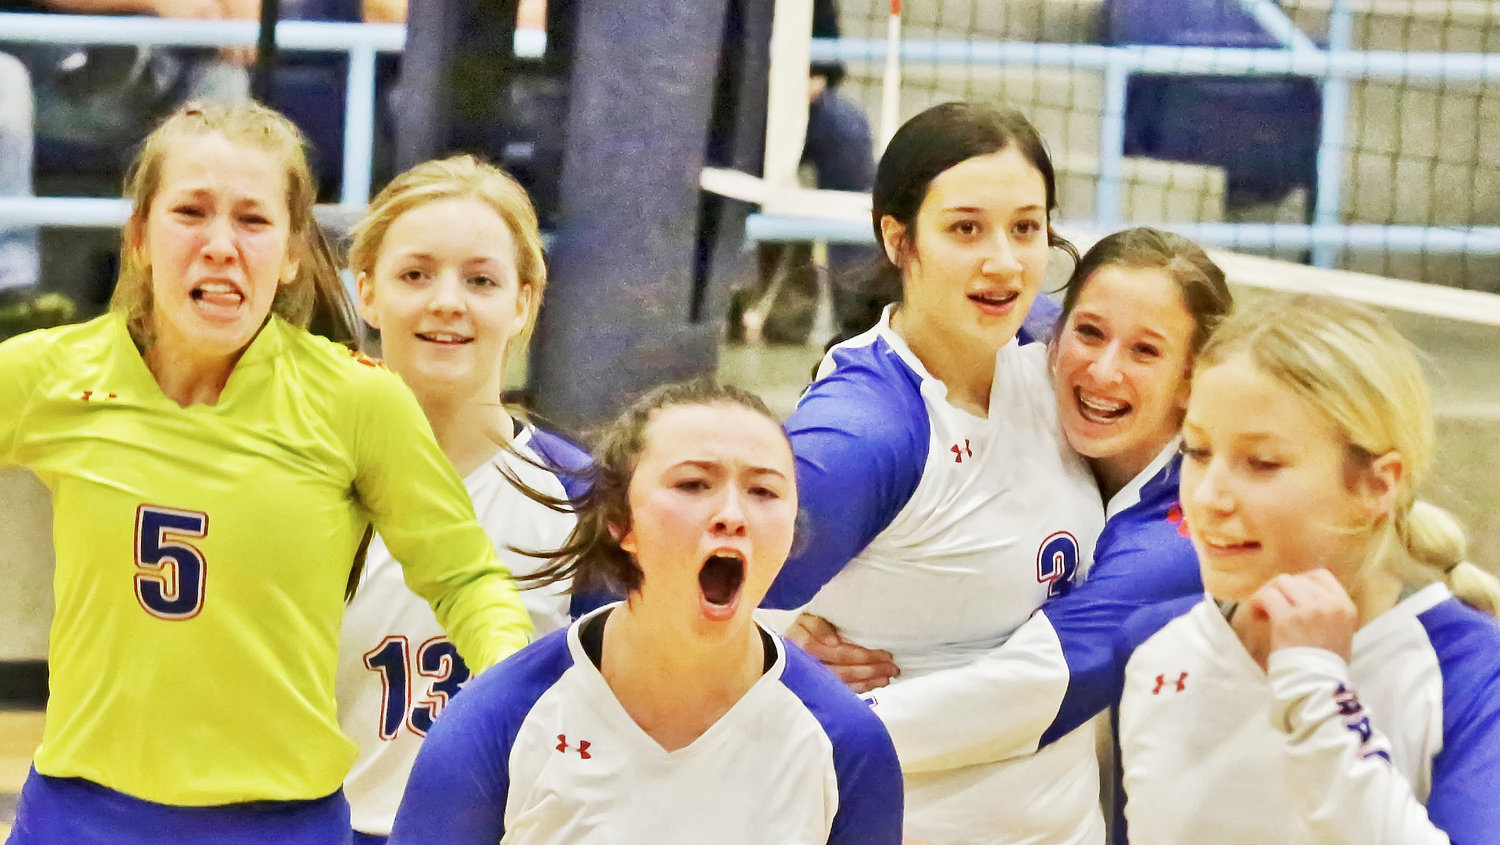 The moment of victory after Kalli Wright buried a kill shot  and secured Alba-Golden’s bi-district championship. From left are pictured: Hope Wiley, Cacie Lennon, Kayli Covey, Wright, Skyler West and Amanda Stewart. (Monitor photo by John  Arbter)